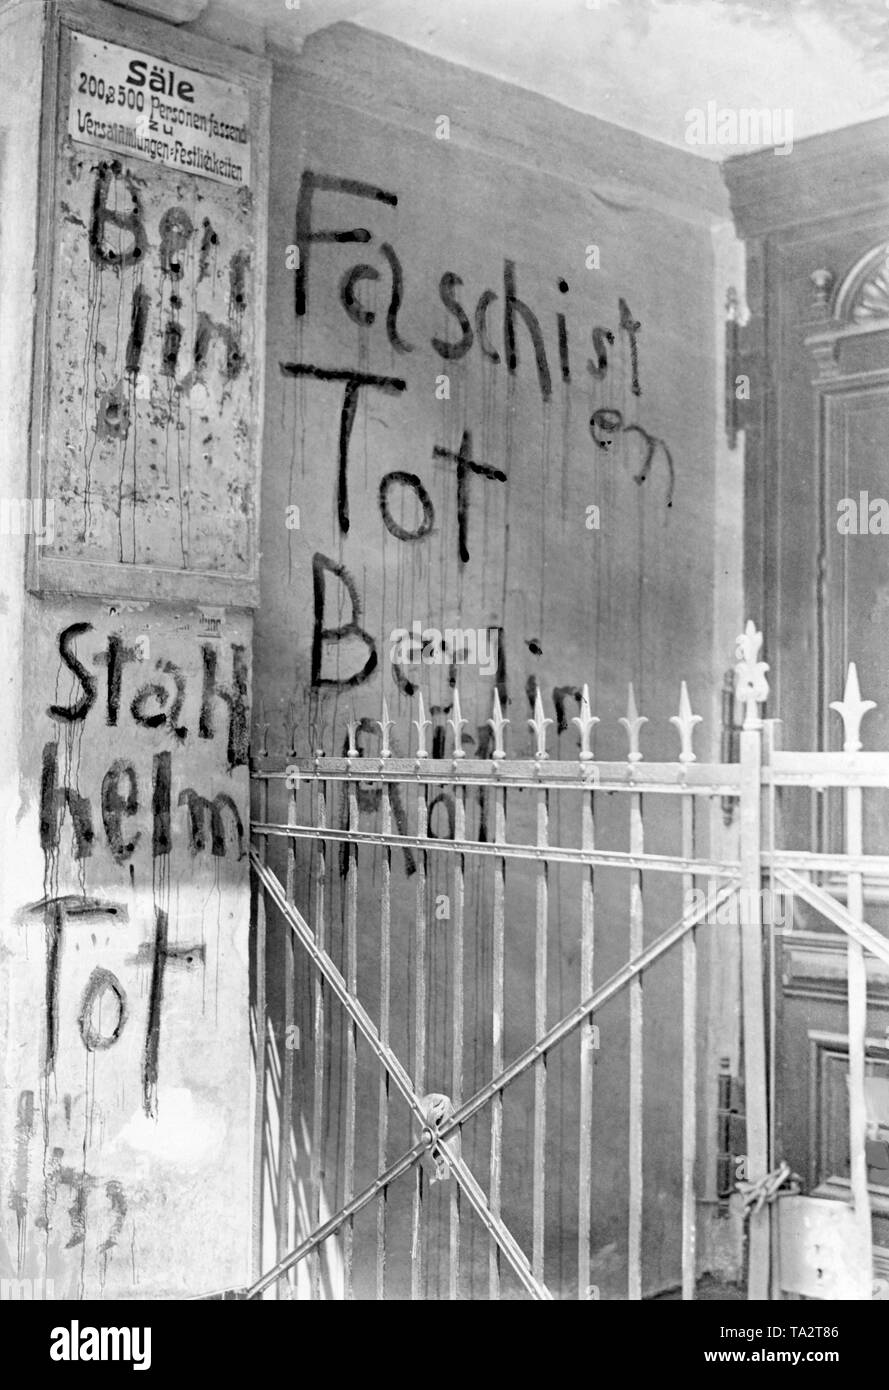 At a Berlin house entrance Communists have painted death threats against Fascists and members of the Stahlhelm. There were street battles between SA and the Rotfrontkaempferbund especially in the working class districts. Stock Photo